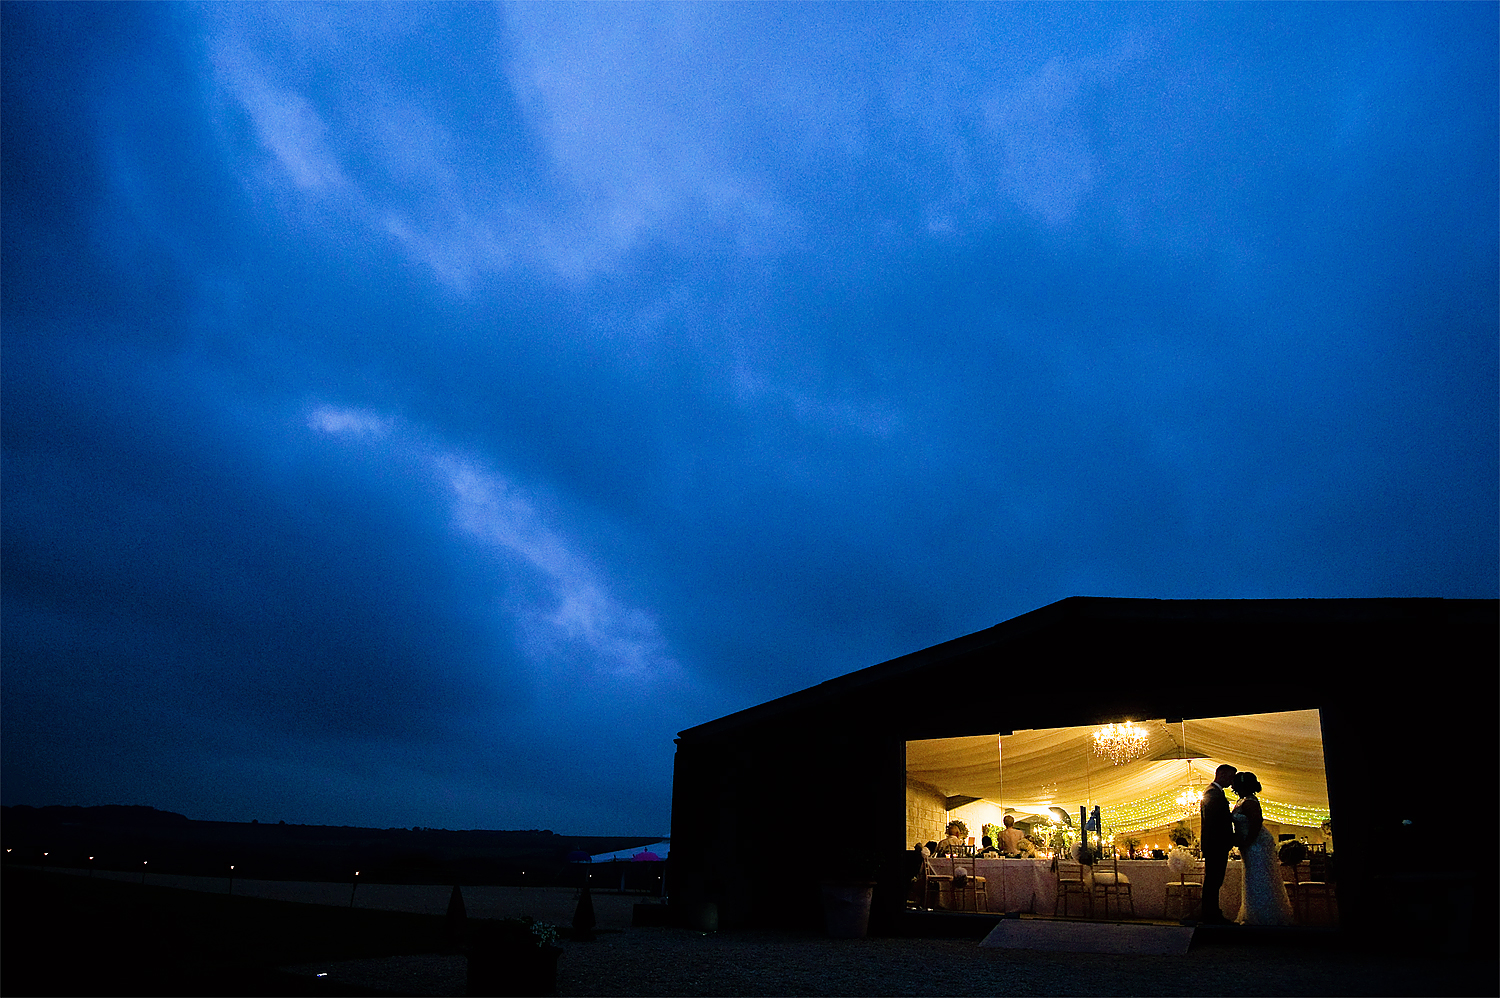 Bride and groom silhouetted in window of Axnoller Farm wedding reception barn at dusk